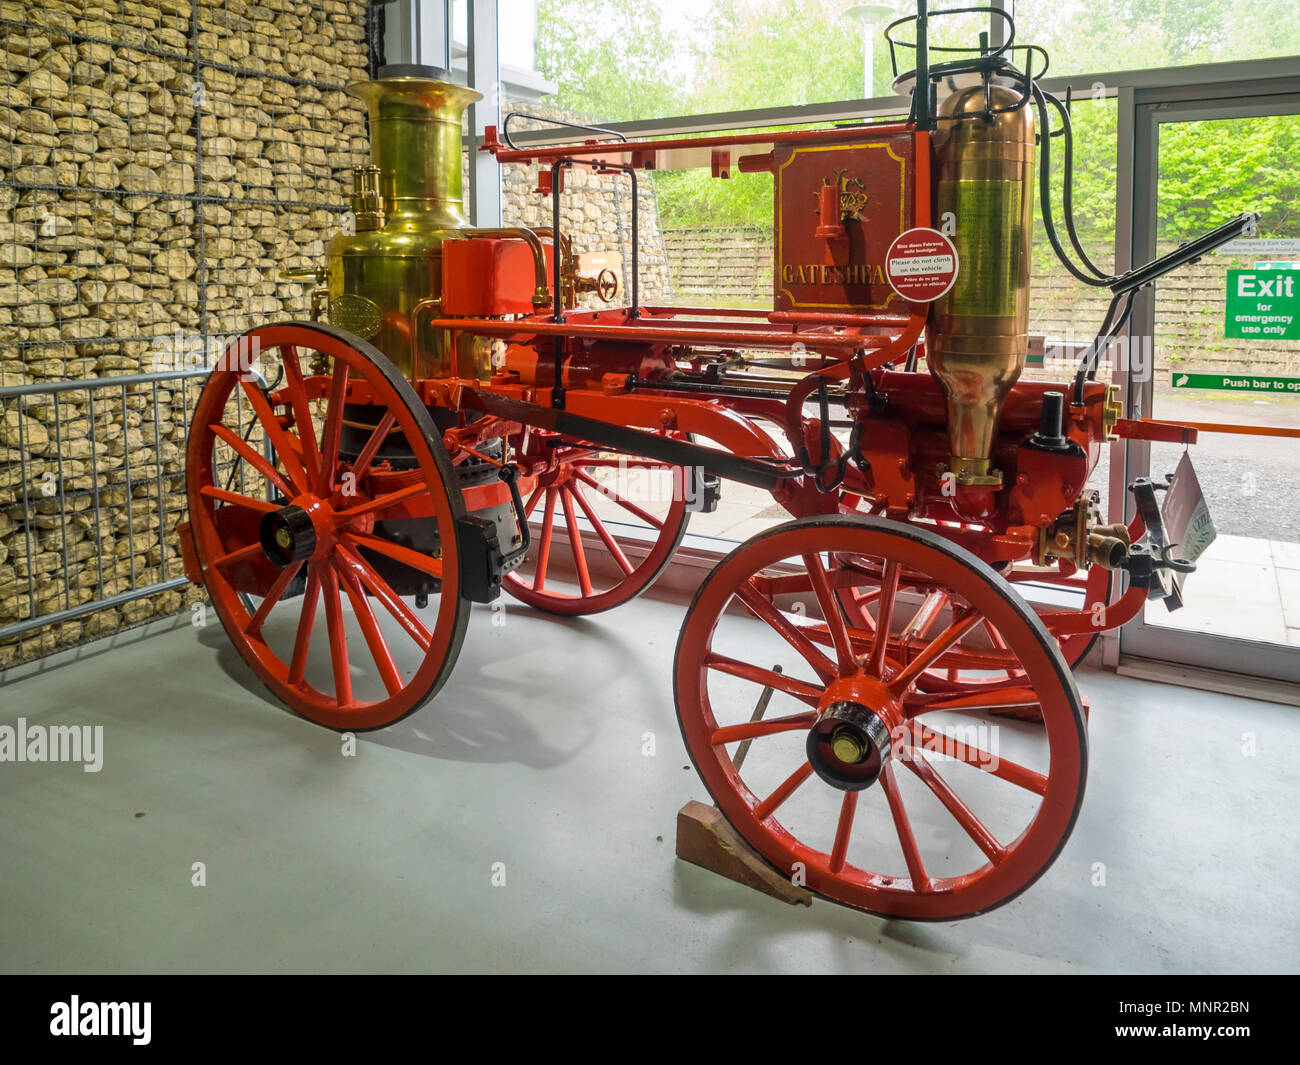 A horse drawn Fire engine for extinguishing fires built by Merryweather in 1880 for Gateshead council displayed at NRM Shildon Stock Photo